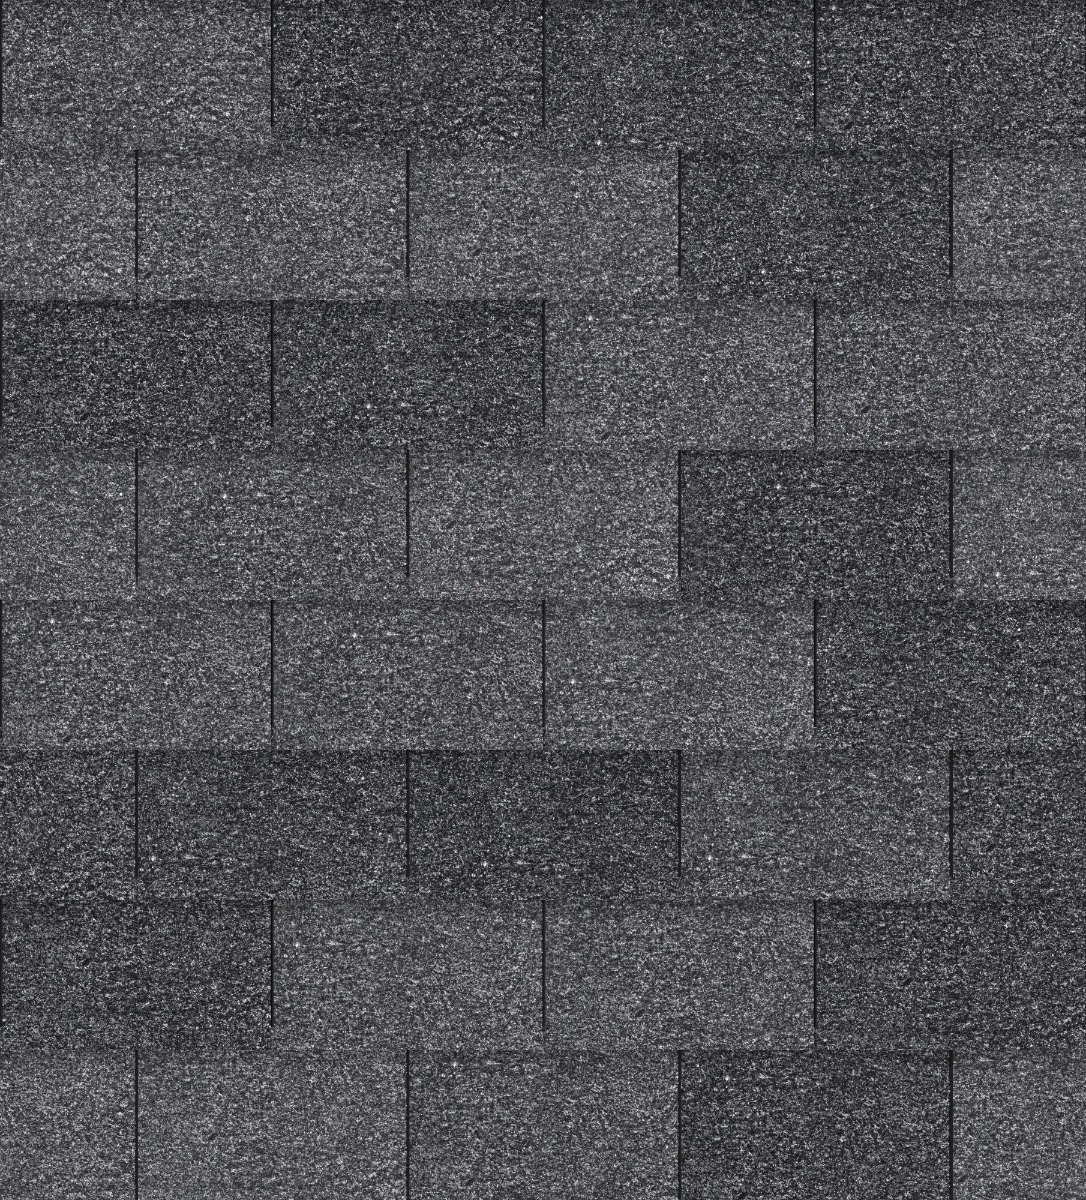 A seamless surfacing texture with bitumen units arranged in a Stretcher pattern